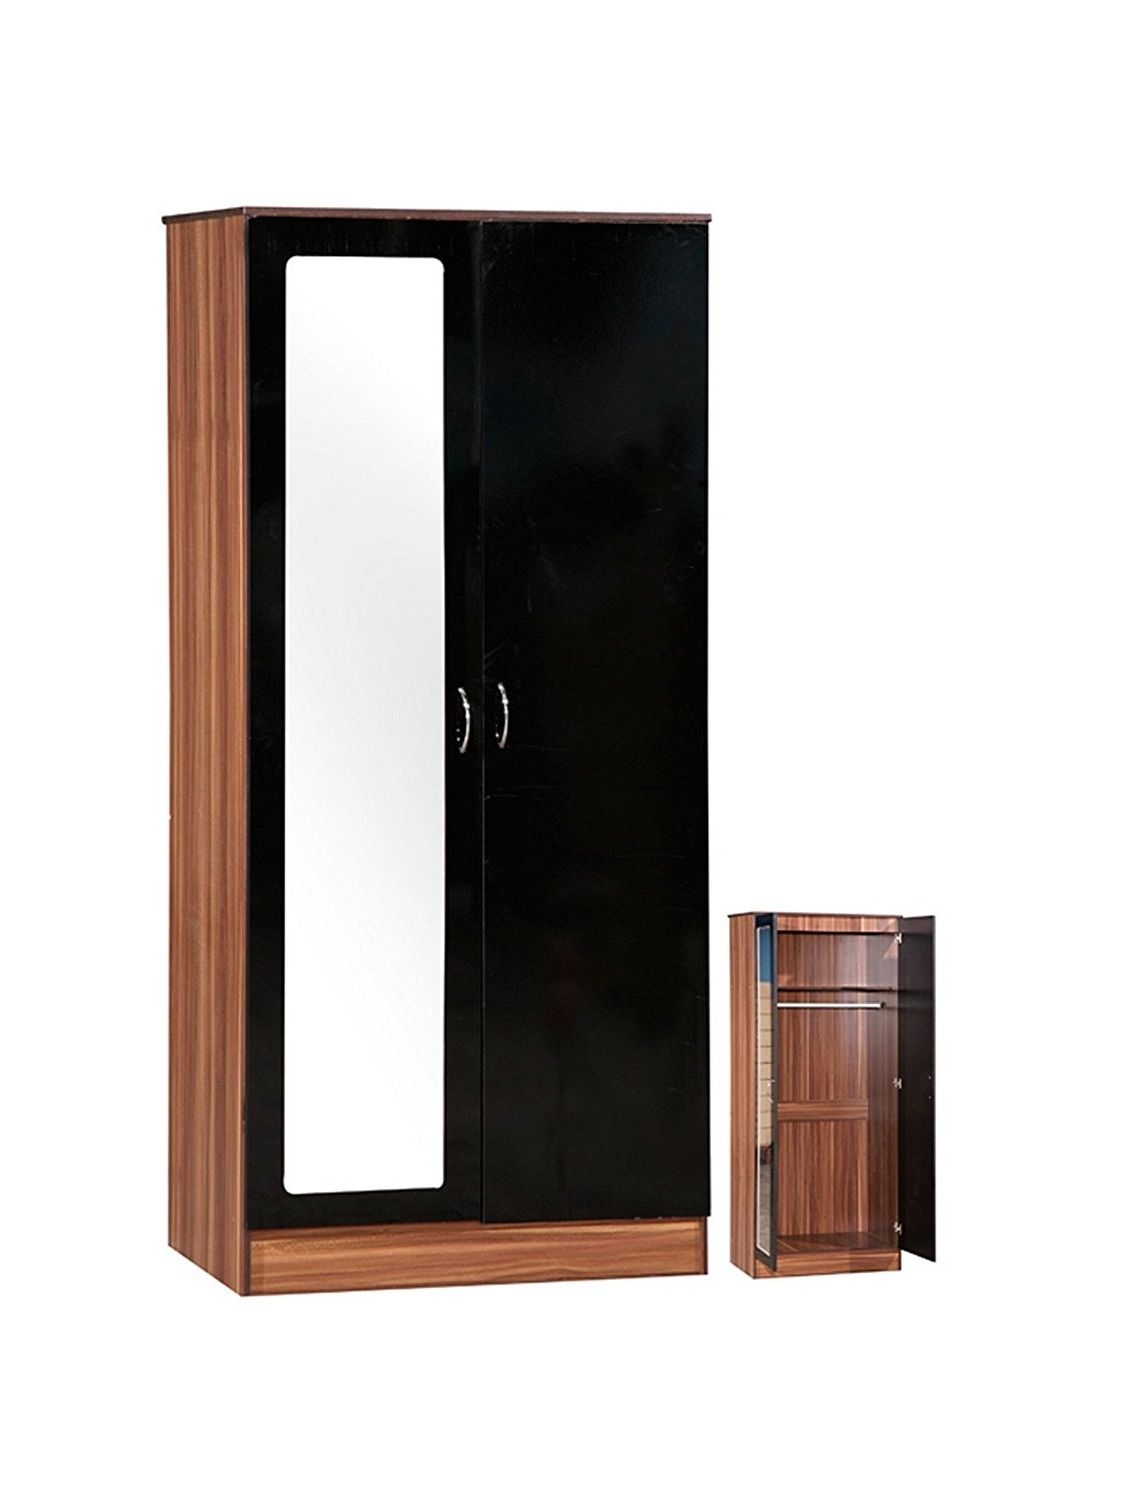 Current High Gloss Black Wardrobes Within Alpha High Gloss 2 Door Wardrobe With Mirror, Shelf And Hanging (View 11 of 15)